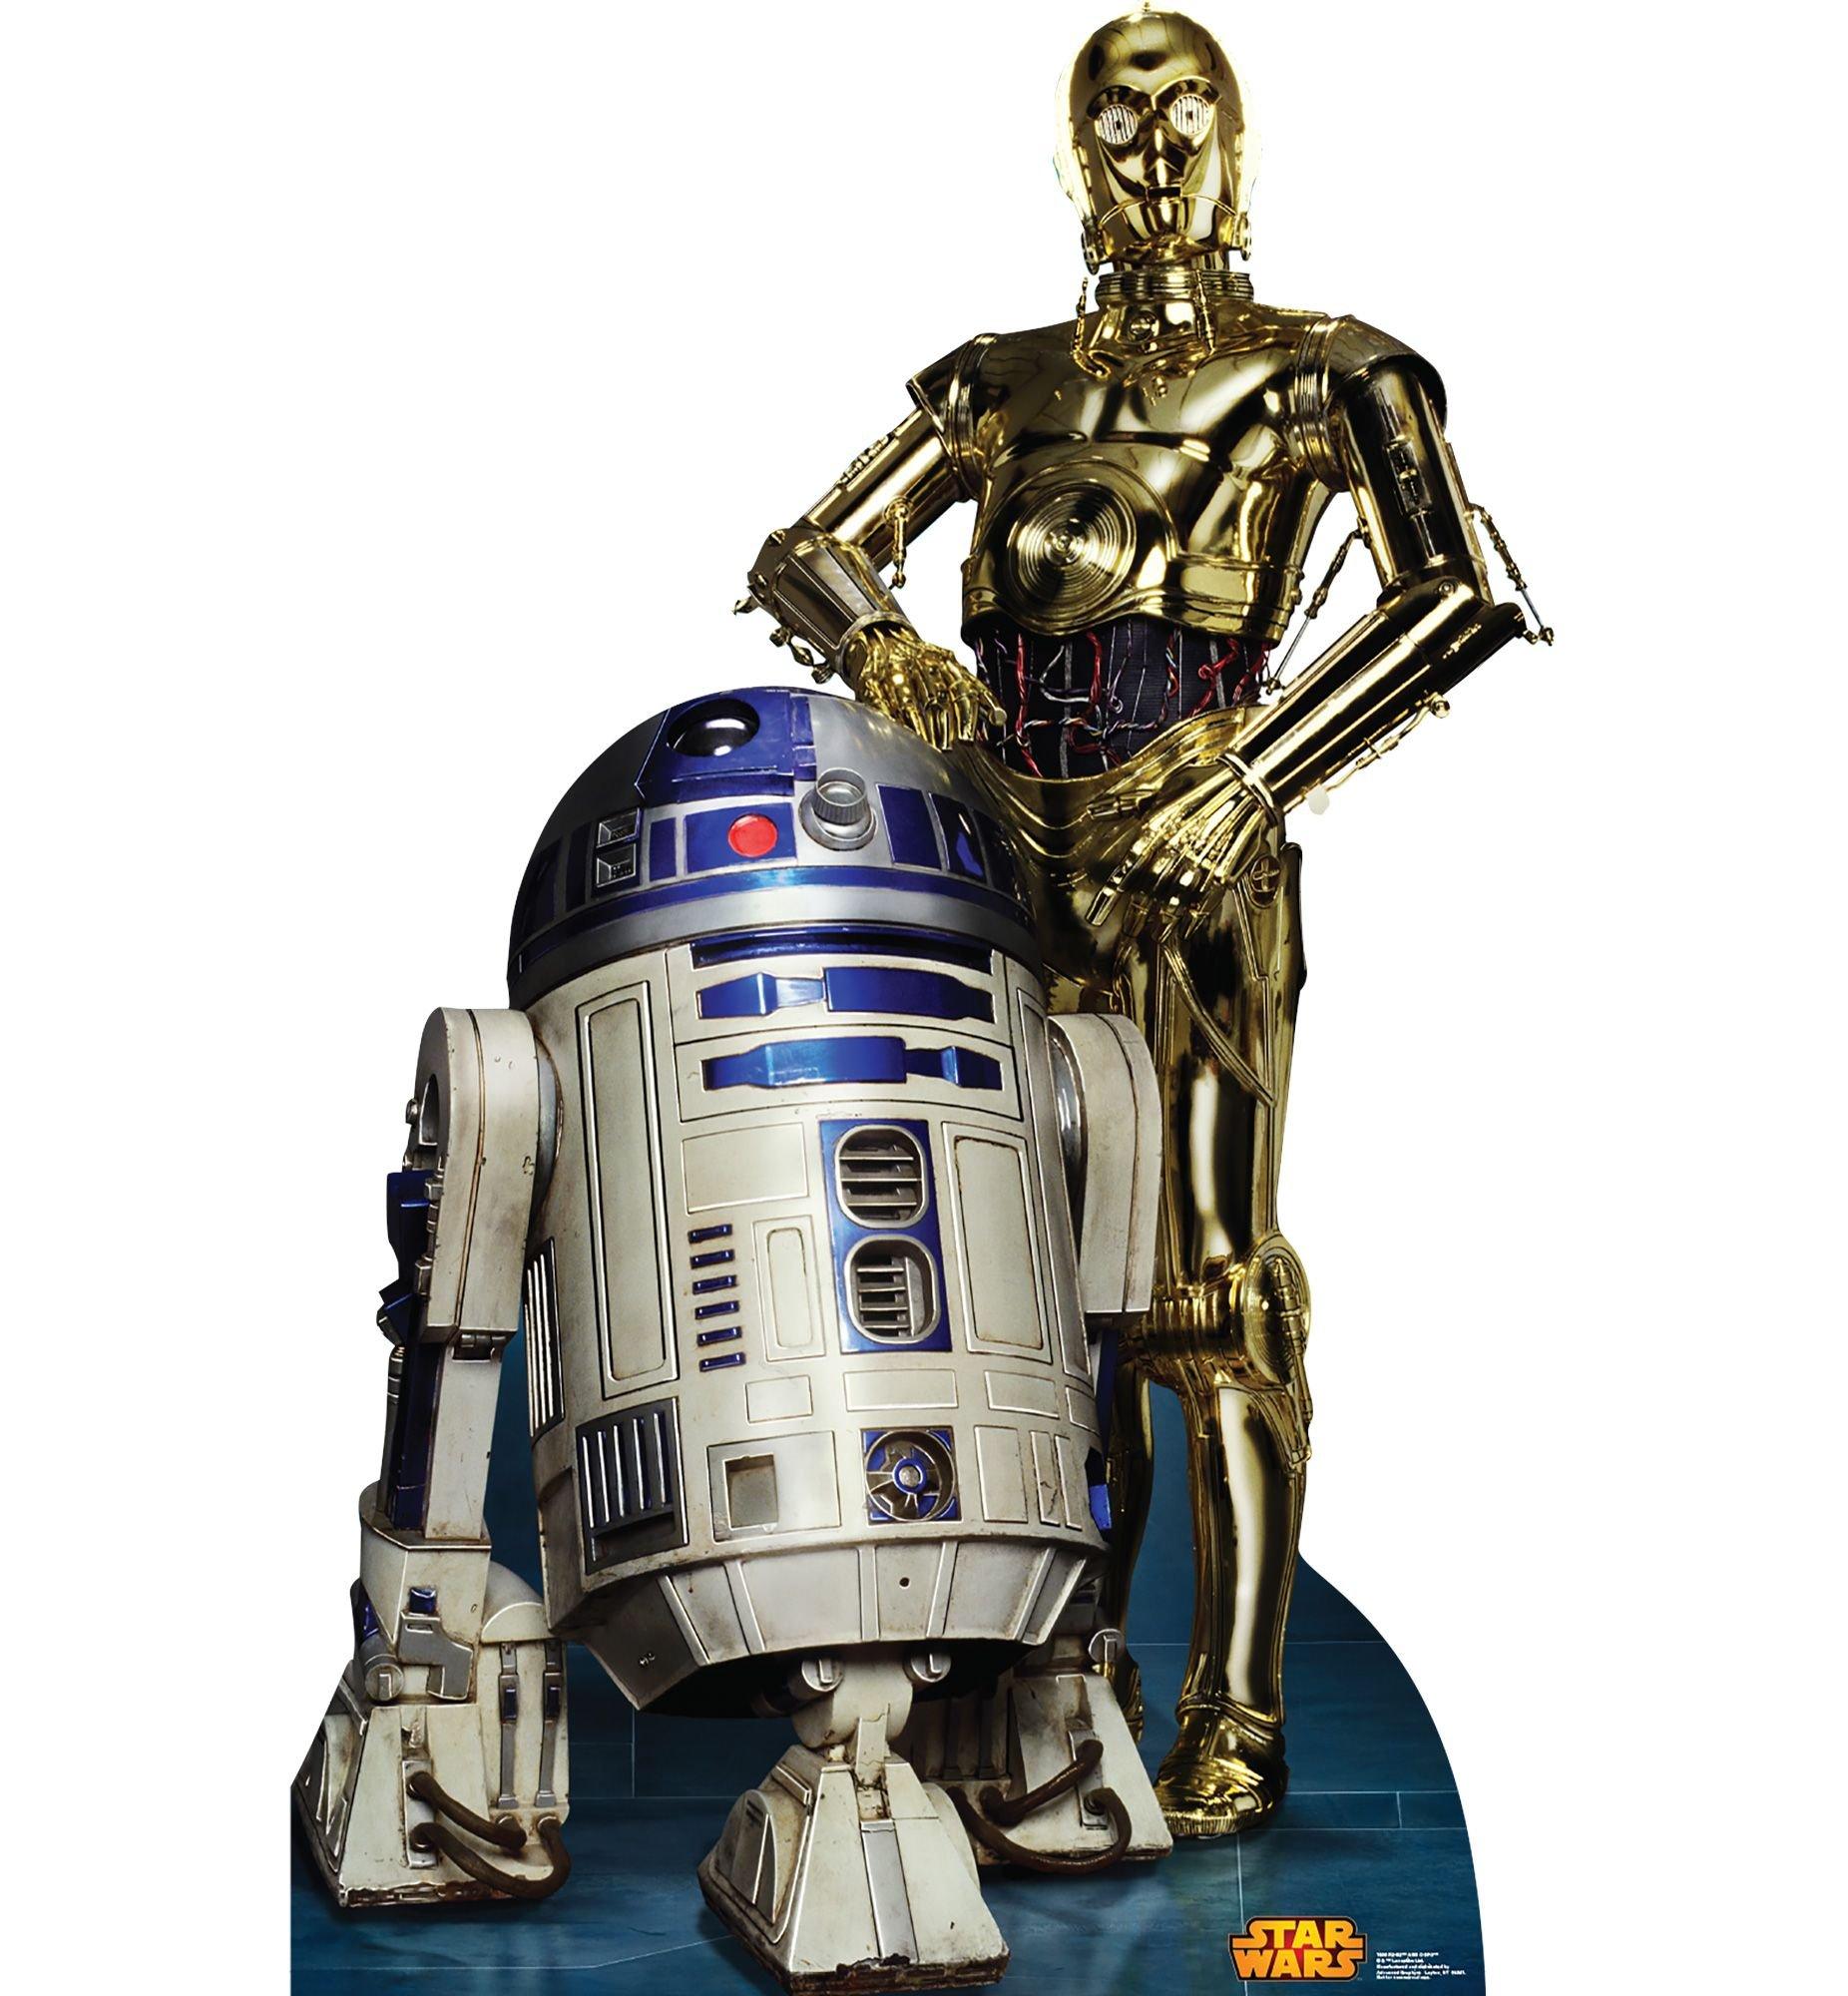 Custom Display for Life Sized Star Wars Statues of C-3PO & R2-D2 » Tom  Spina Designs